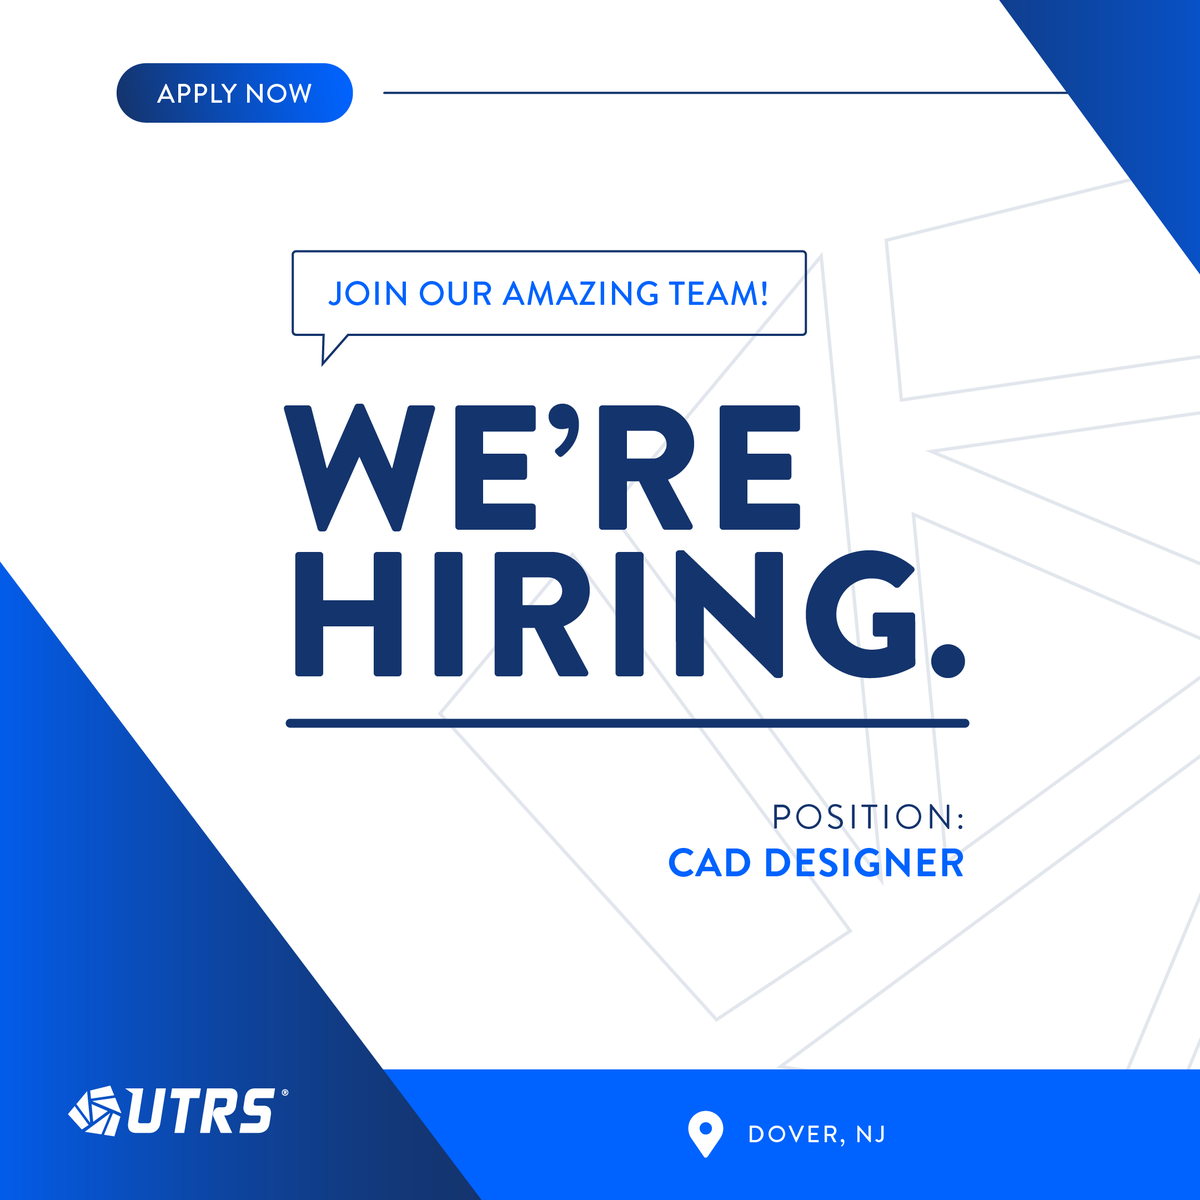 Are you interested in a CAD Designer position? Then we want you on the UTRS Team! Check out our job openings and apply today: bit.ly/42uuBKF #jobsearch #NJjobs #UTRS #designer #CAD #careers